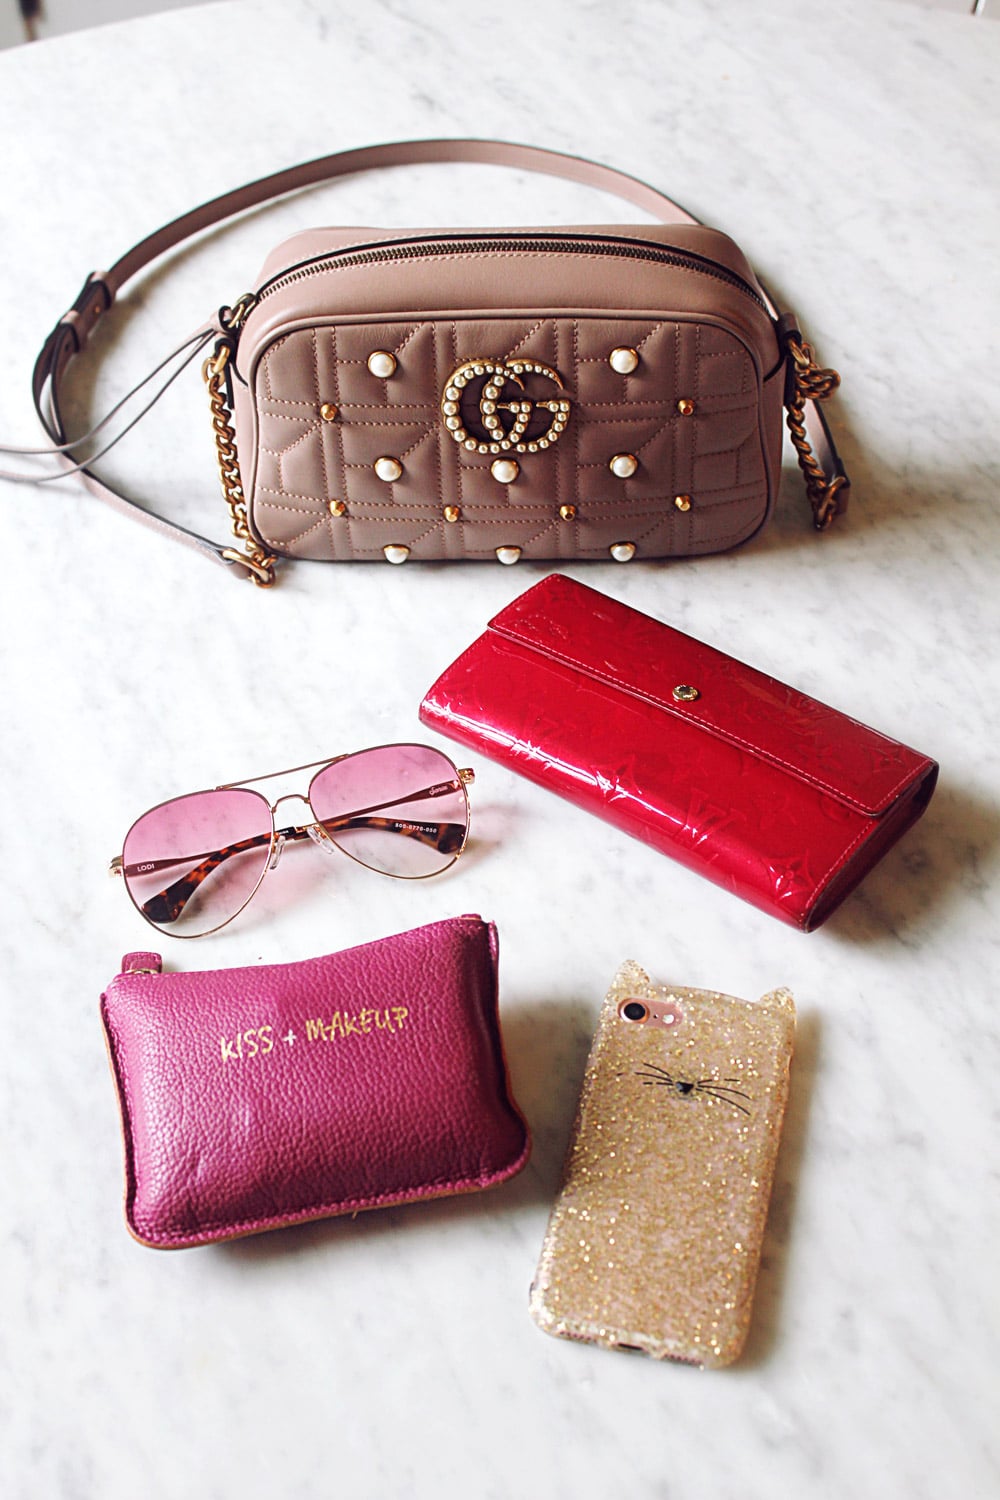 gucci marmont pearl taupe nude pink camera bag review what fits in the bag lv vernis long wallet sonix aviator sunglasses